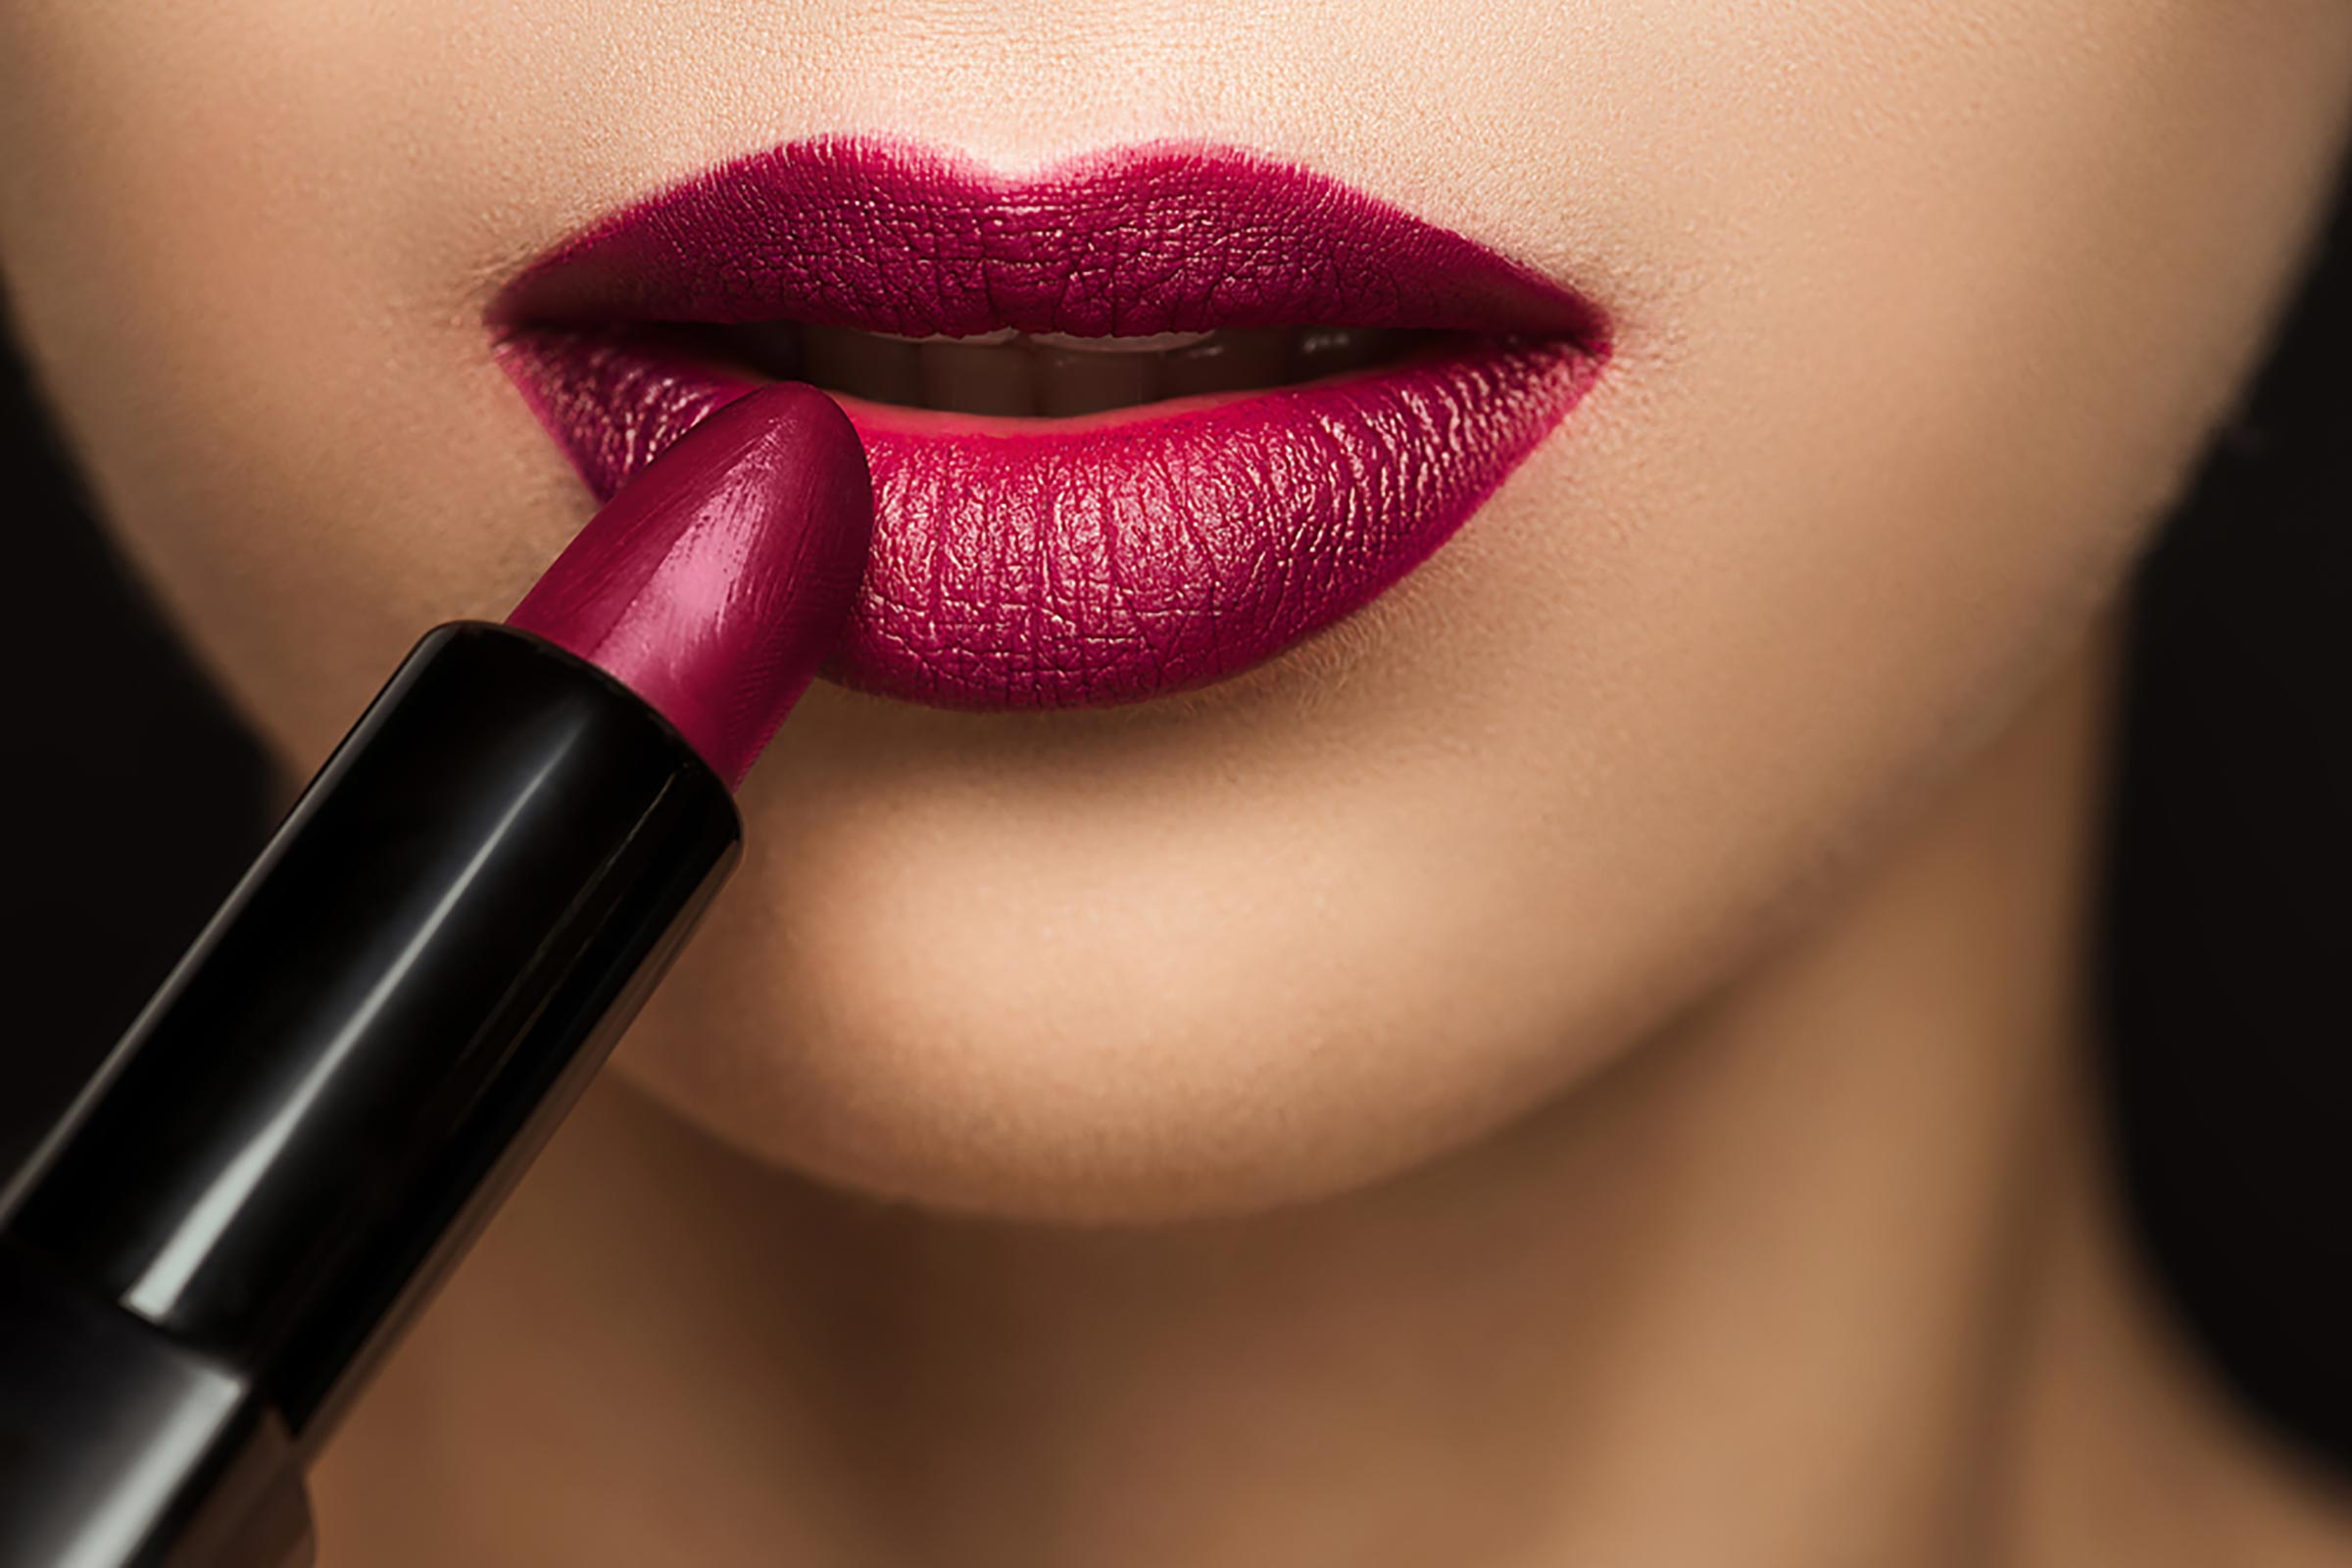 Lipstick Mistakes that Are Ruining Your Look | Reader's Digest